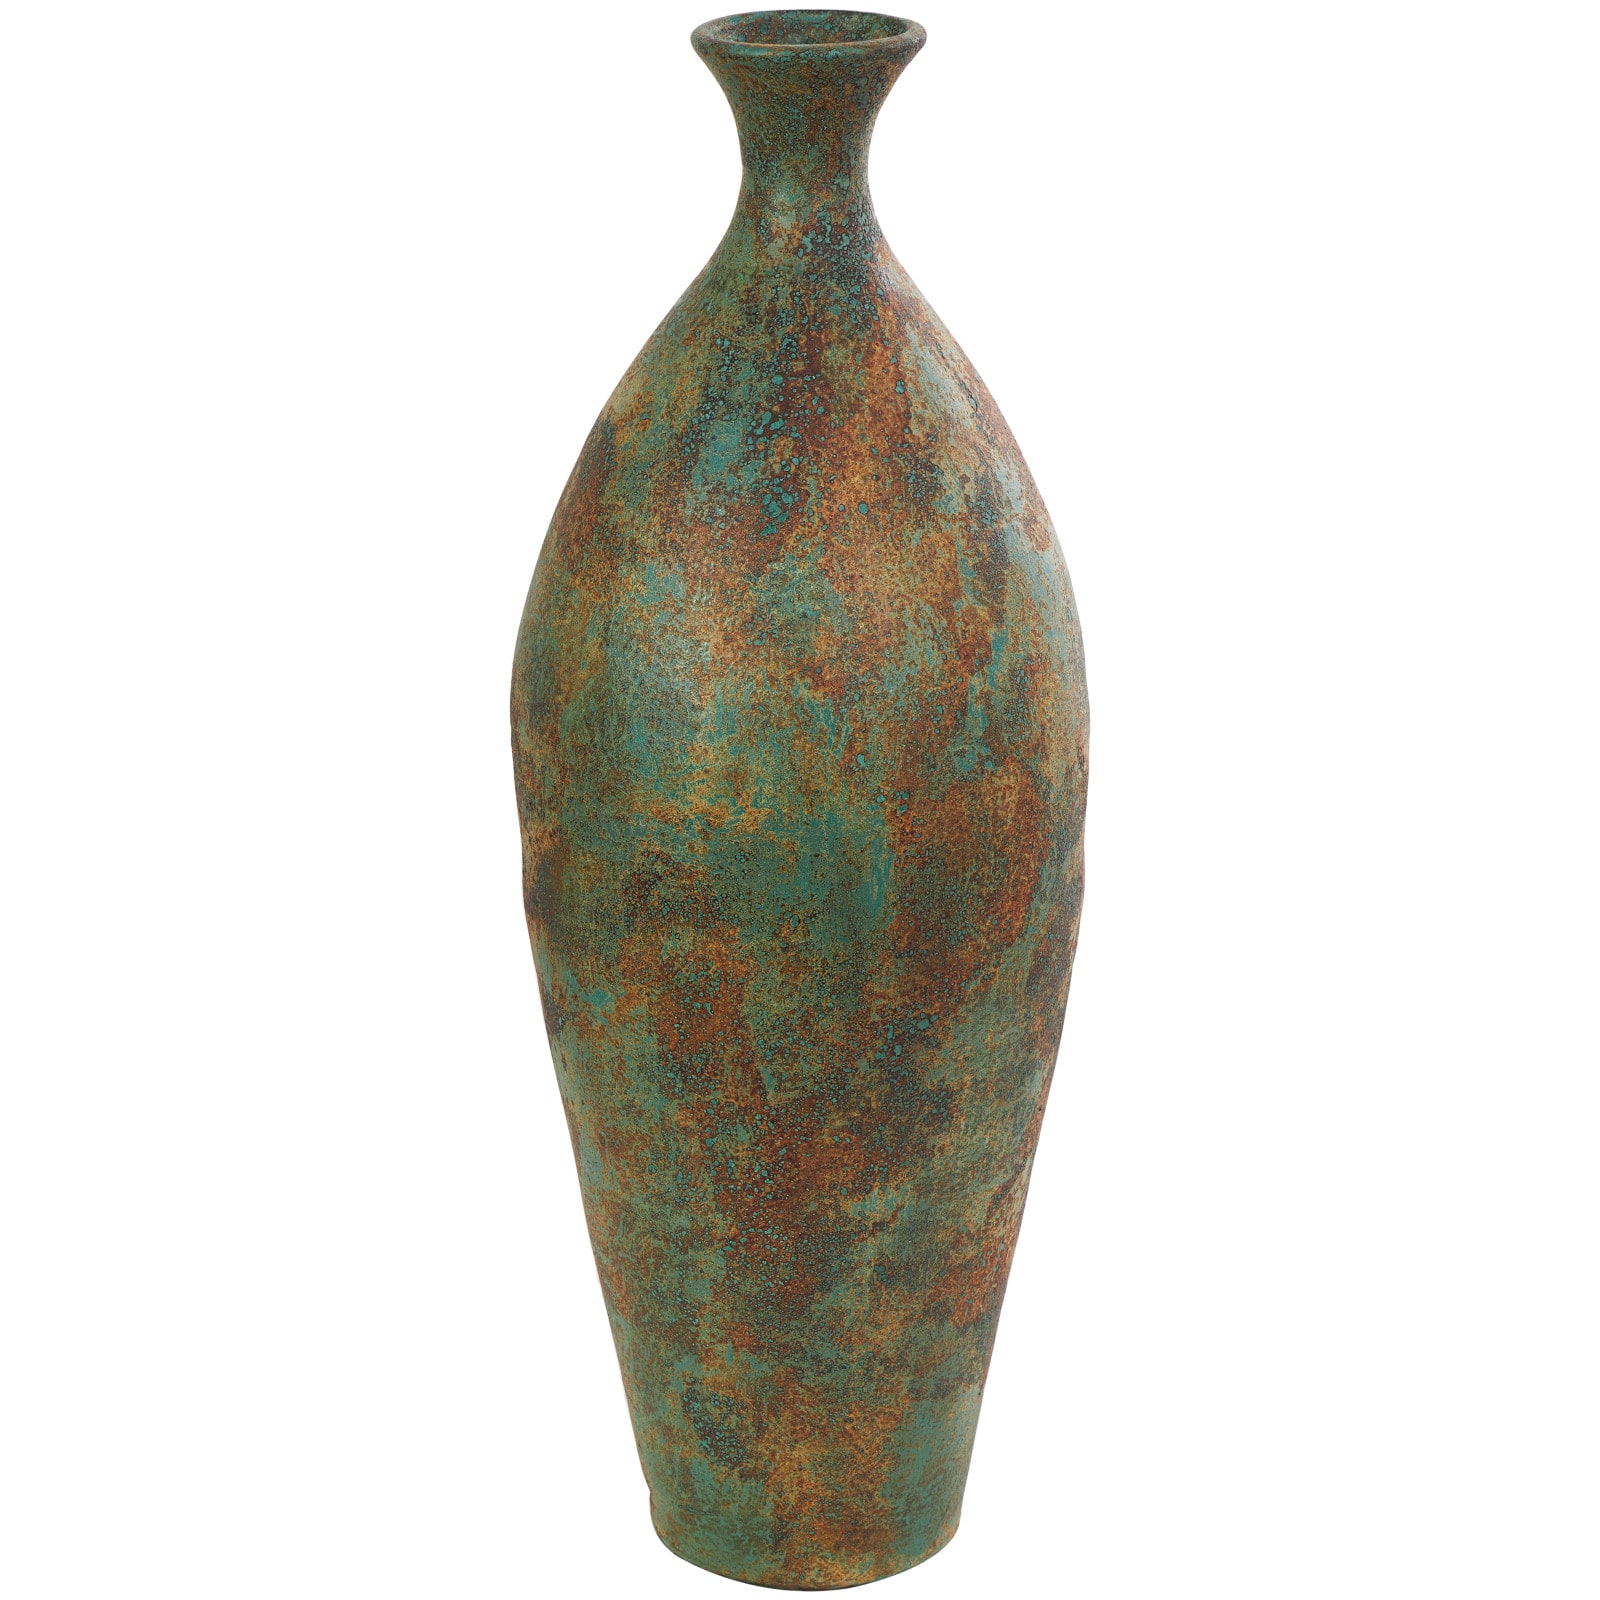 2.5ft. Green Ceramic Tall Distressed Antique Style Vase